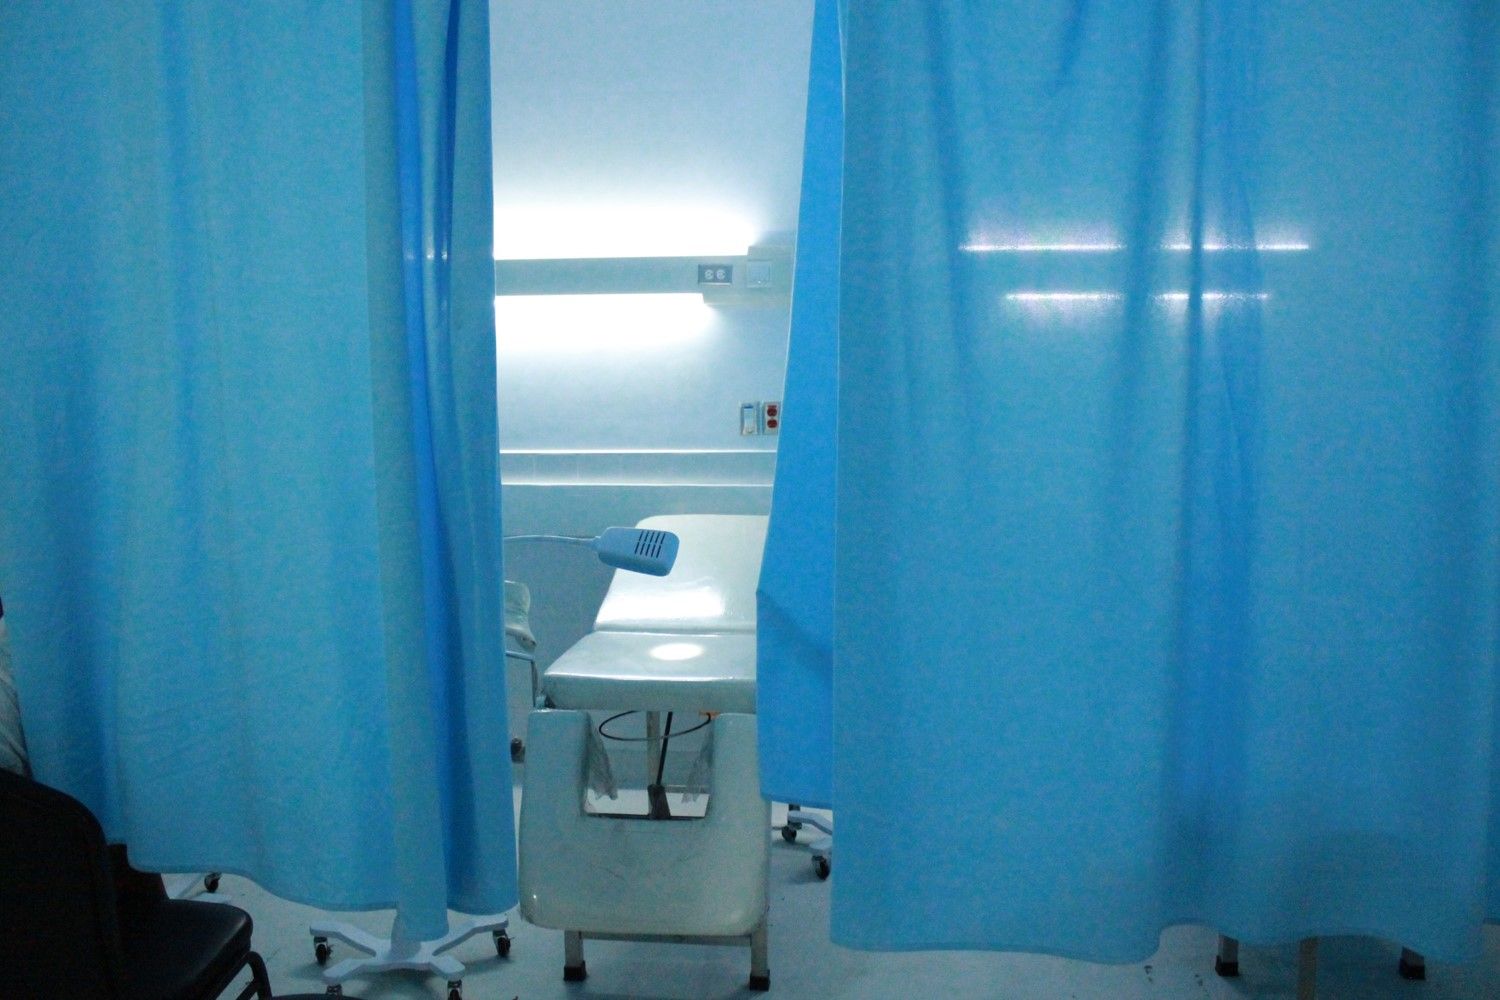 There are five beds in the ward where the cervical cancer screening takes place. One bed is occupied by a woman in labor and one is for women who need treatment but the other three are open for screening. Lemour ended up testing positive for pre-cancerous lesions. Thankfully, Lemour was able to get treatment that same day. While the cryotherapy treatment is painful, she said that she is glad it is finished and that she could live a life free from cervical cancer. Lemour plans on going back to her community to educate women about cervical and breast cancer. Image by Anna Russell. Haiti, 2017.